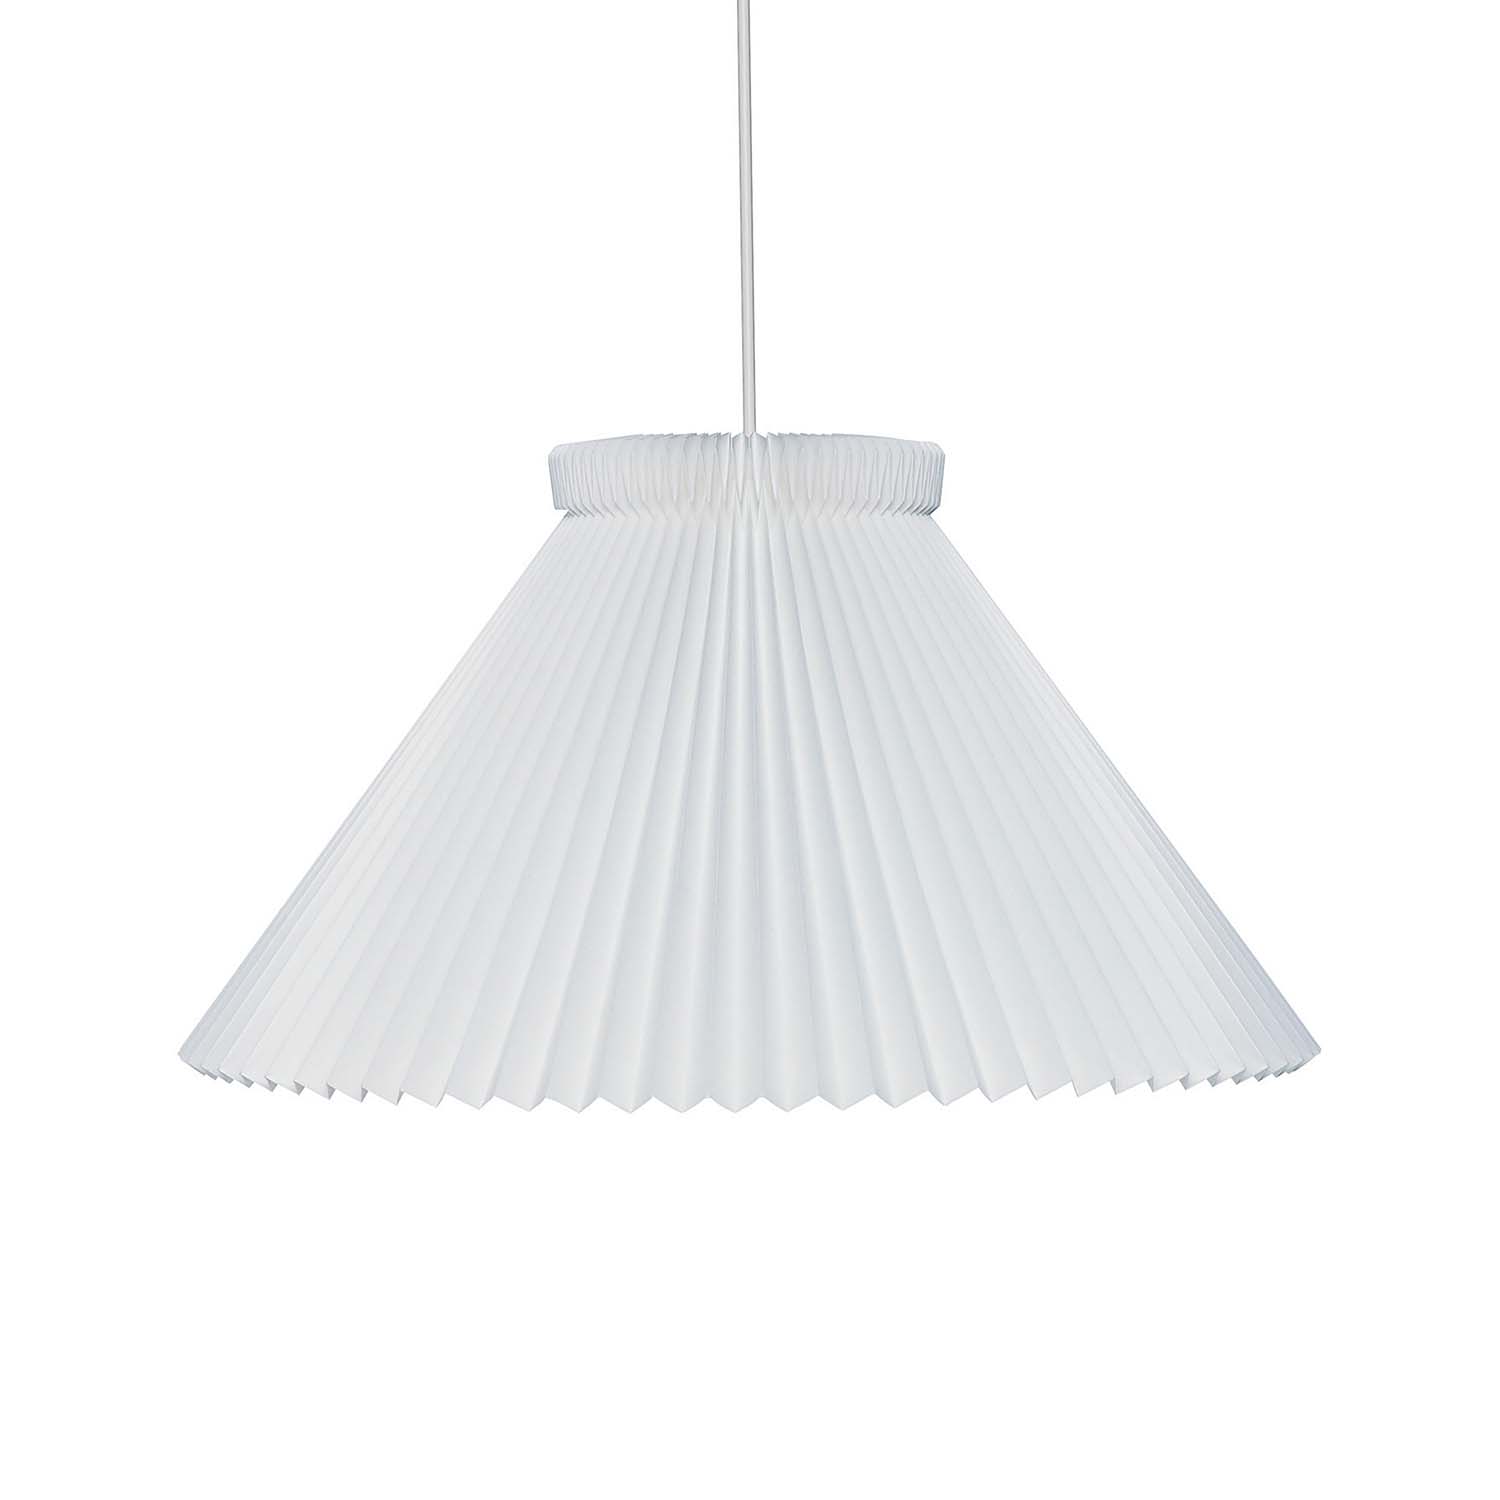 TAGE 1 - Handmade pleated paper lampshade suspension